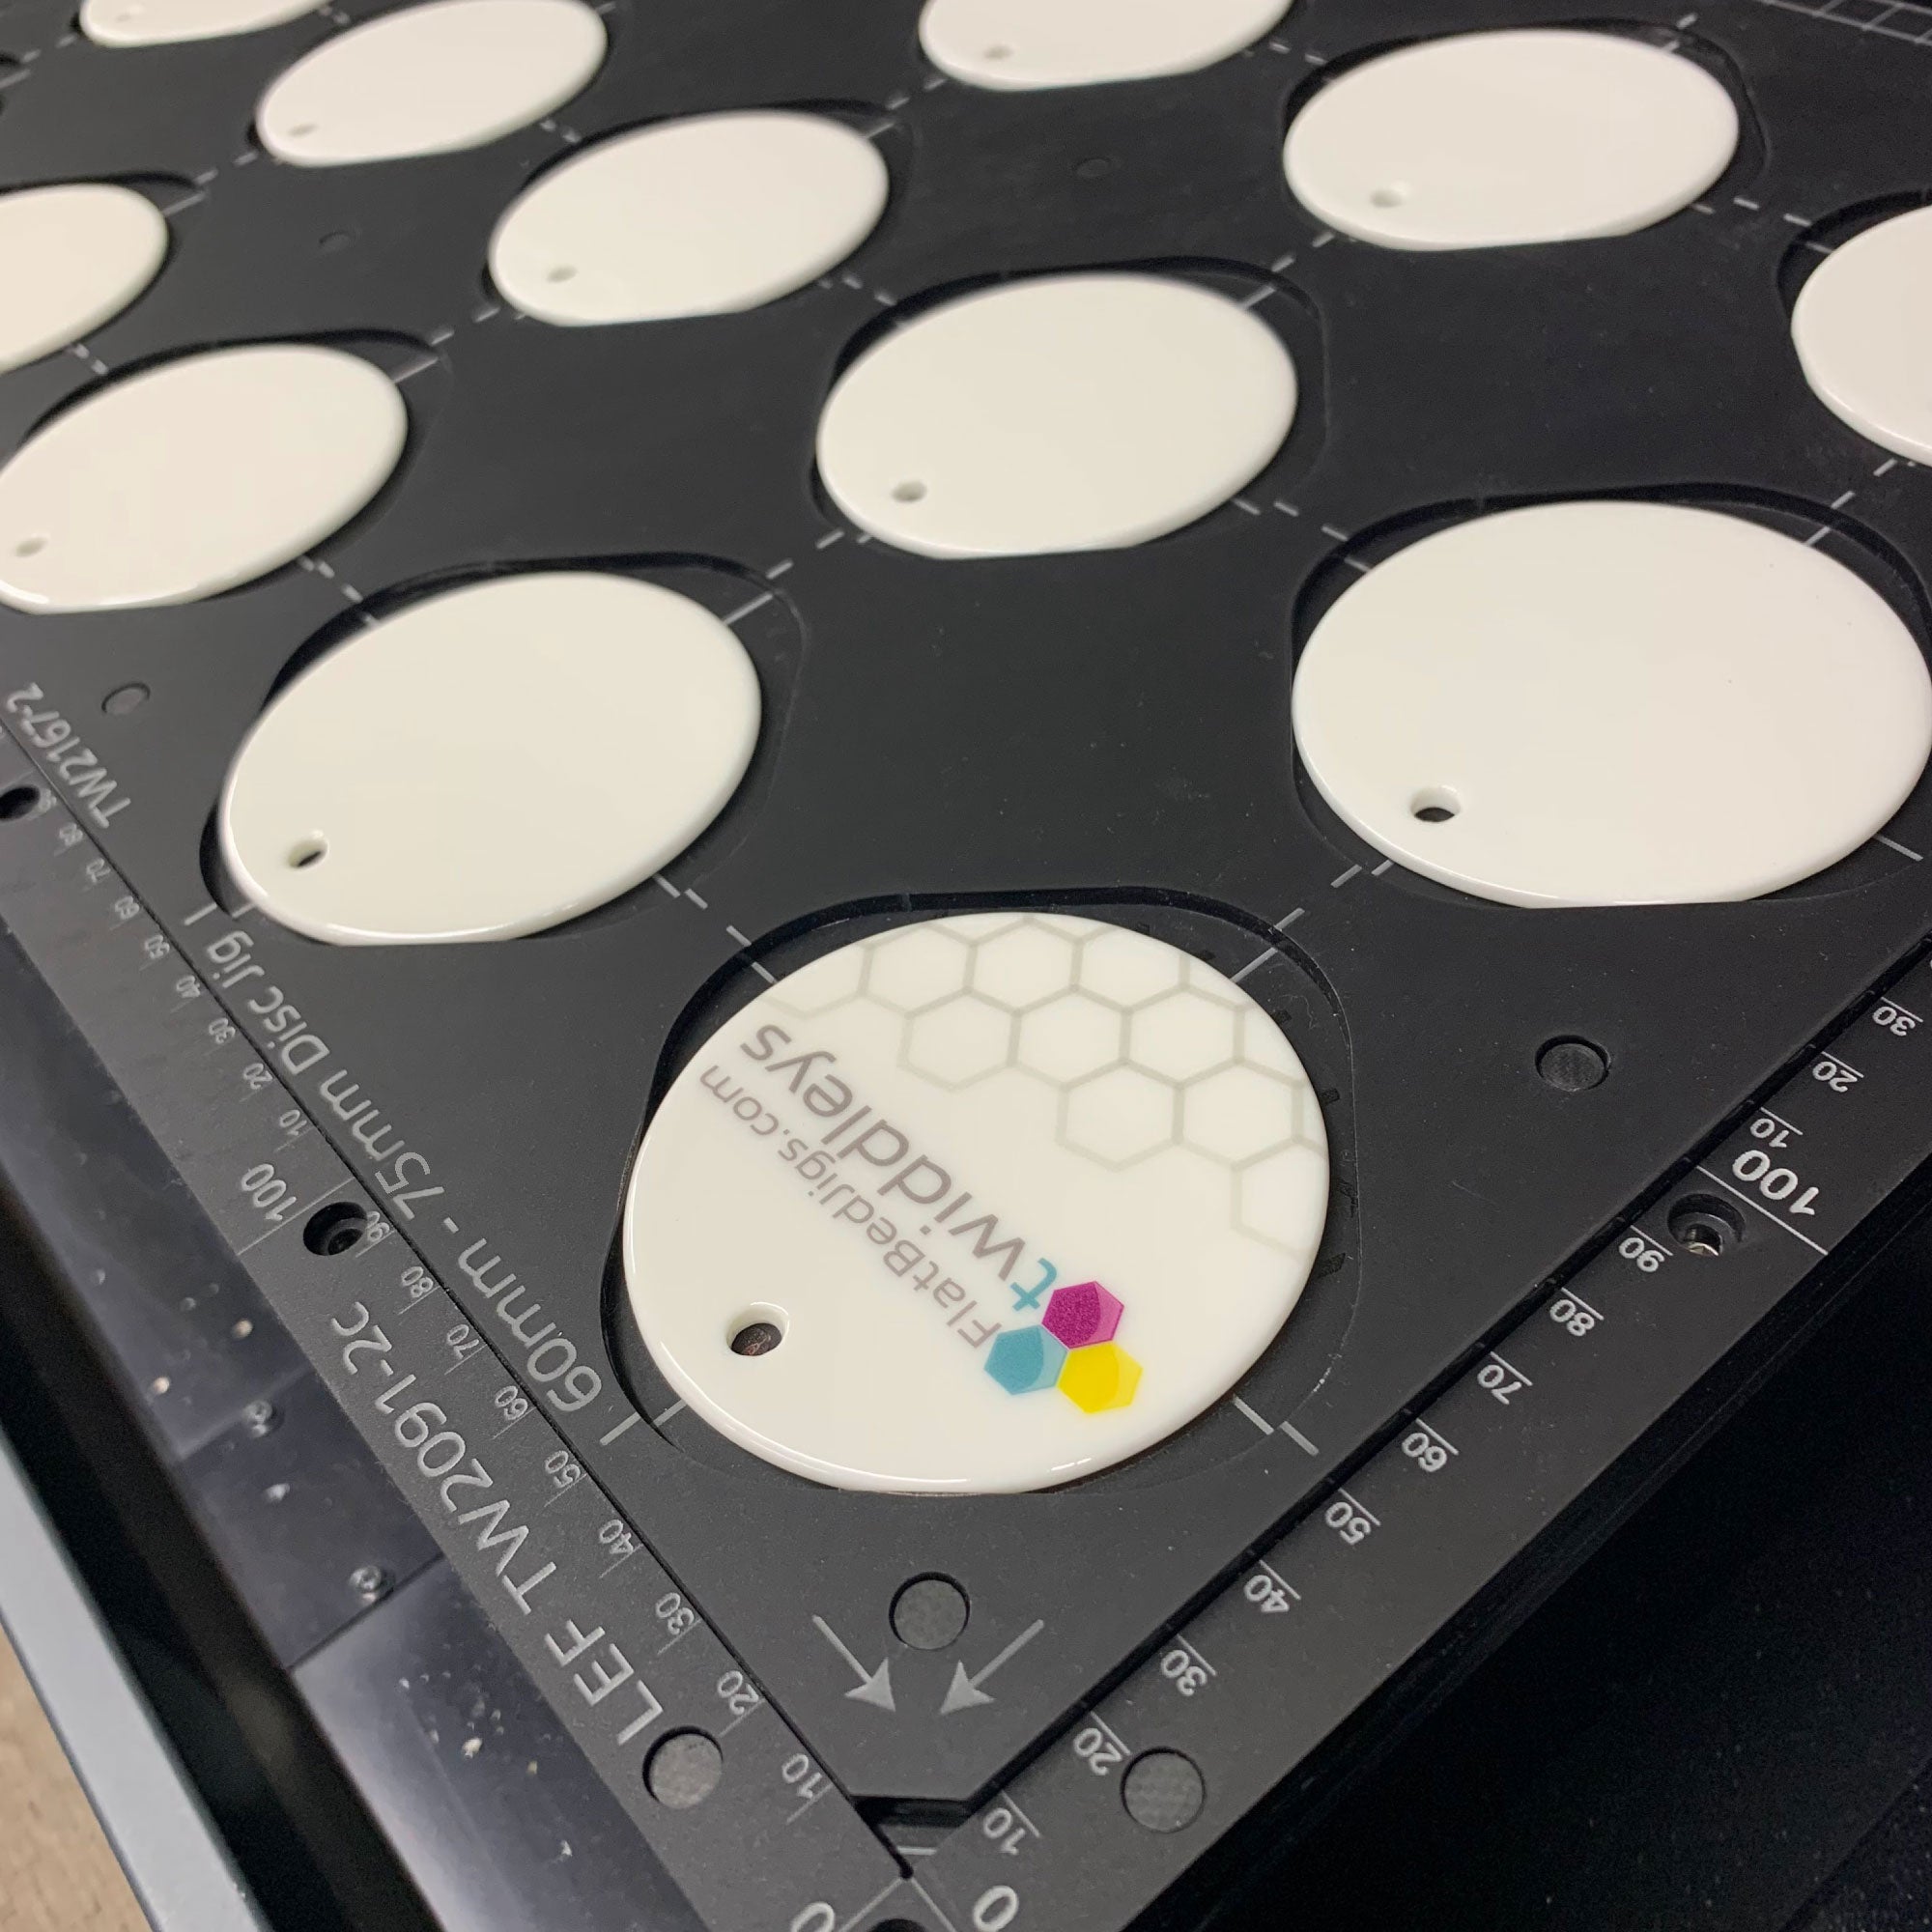 Ceramic Christmas Bauble Printing Jig for Mimaki UJF-7151 Flatbed Printer: 60mm - 77mm Circular Discs (xx Spaces)